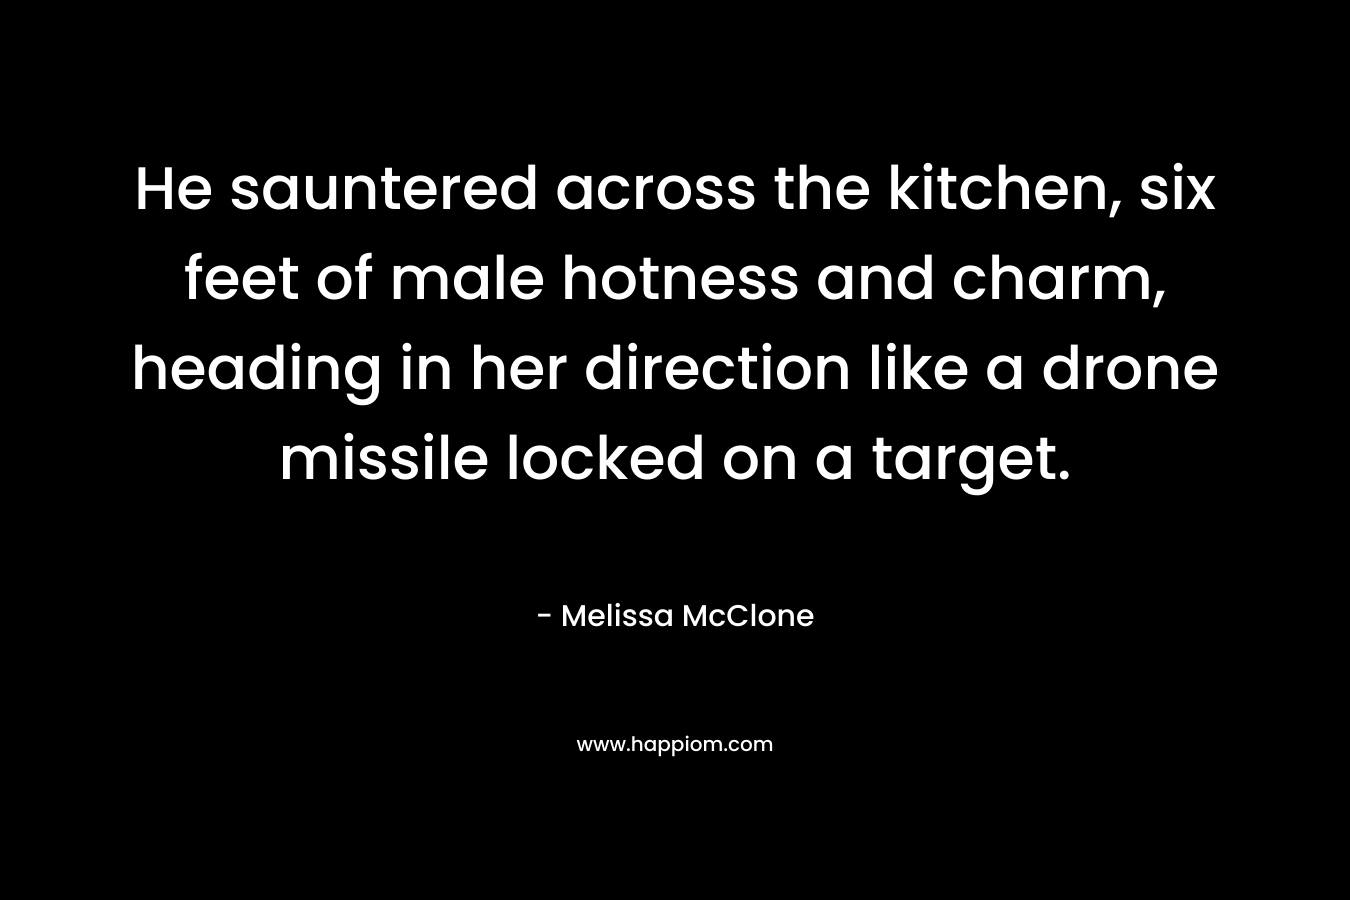 He sauntered across the kitchen, six feet of male hotness and charm, heading in her direction like a drone missile locked on a target. – Melissa McClone